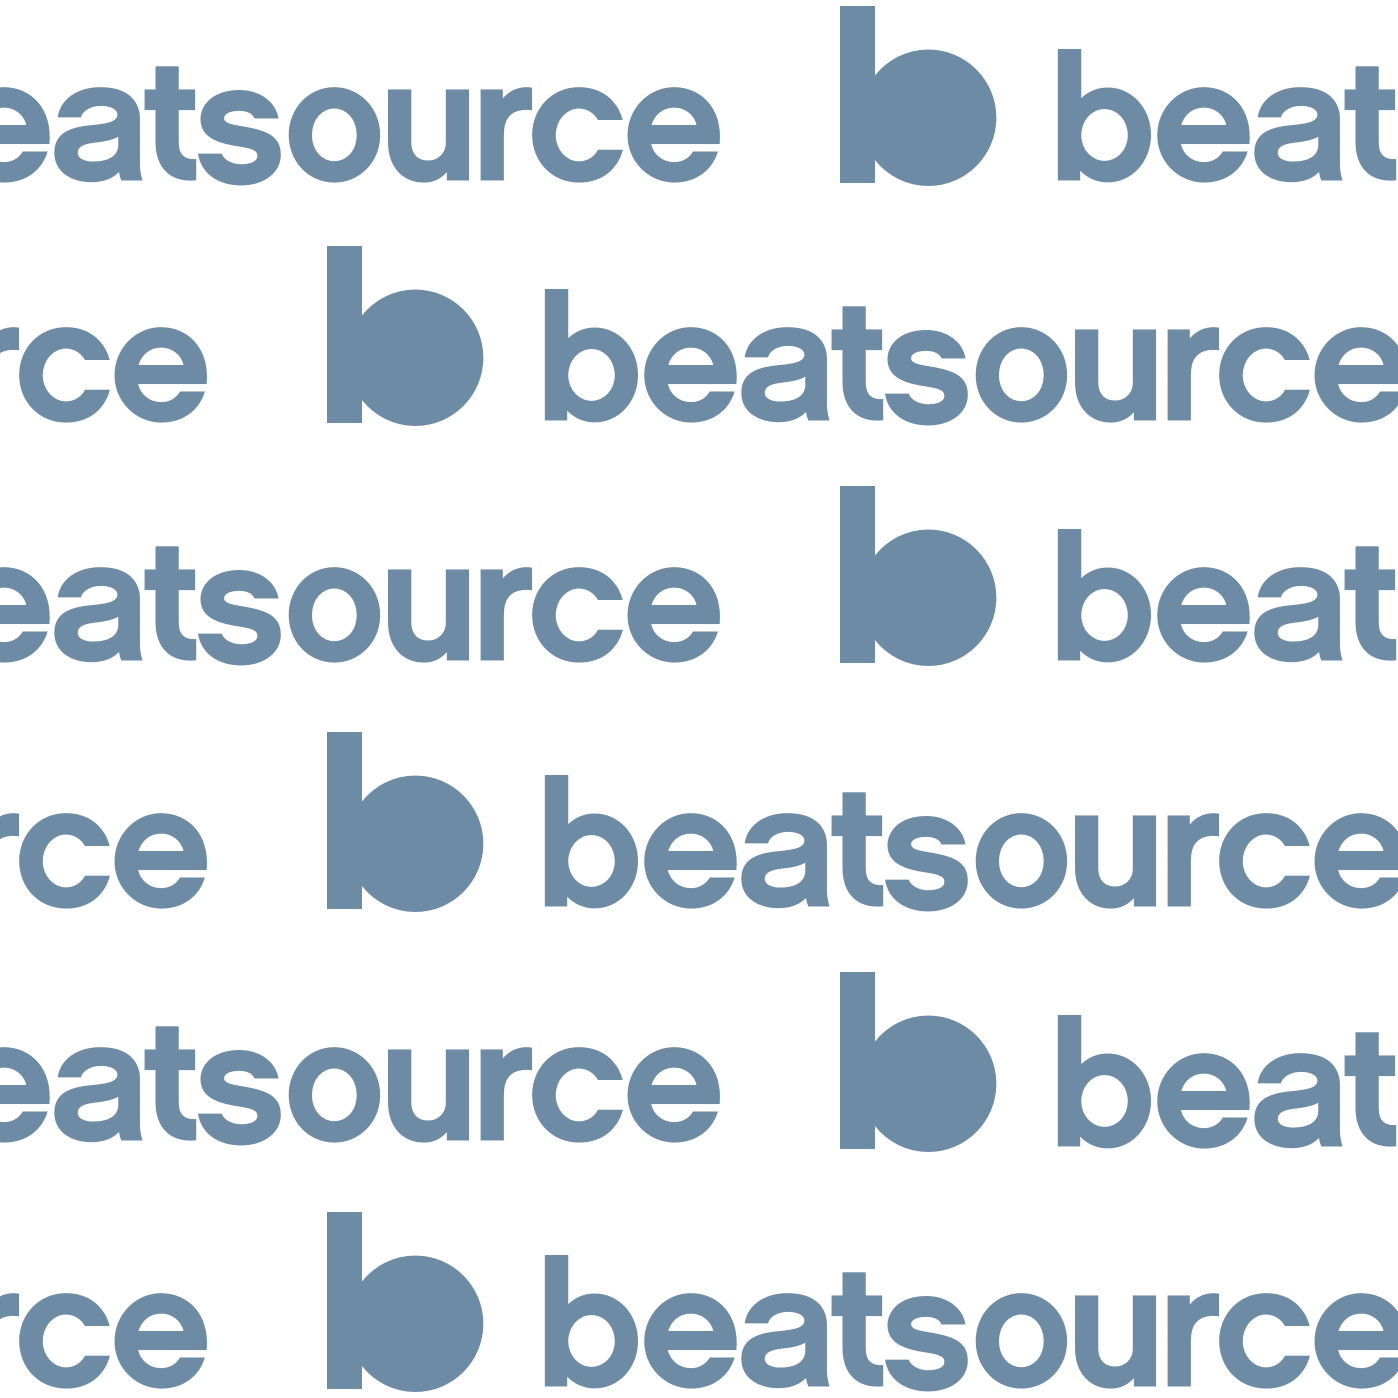 Arc North, Cour & New Beat Order Profile